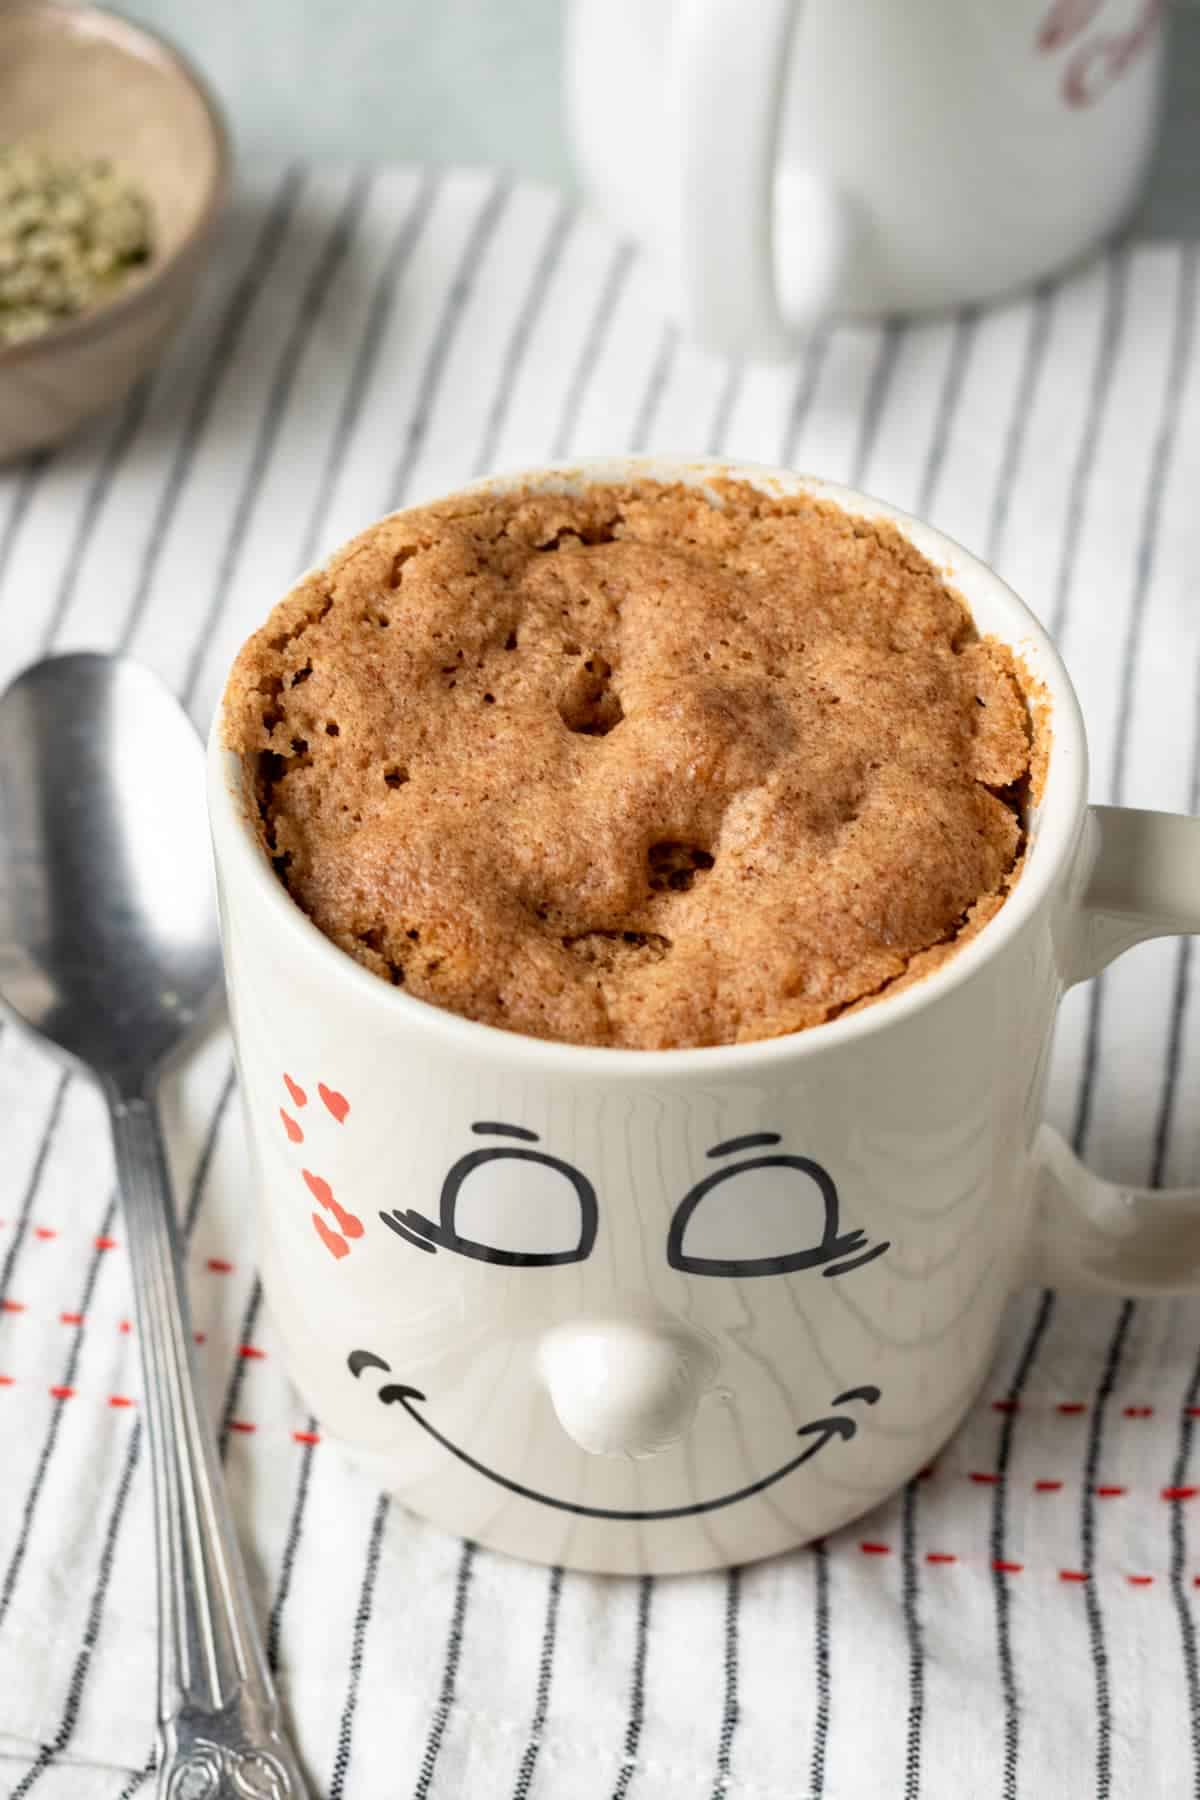 Mug with microwaved muffin inside and spoon on the side.